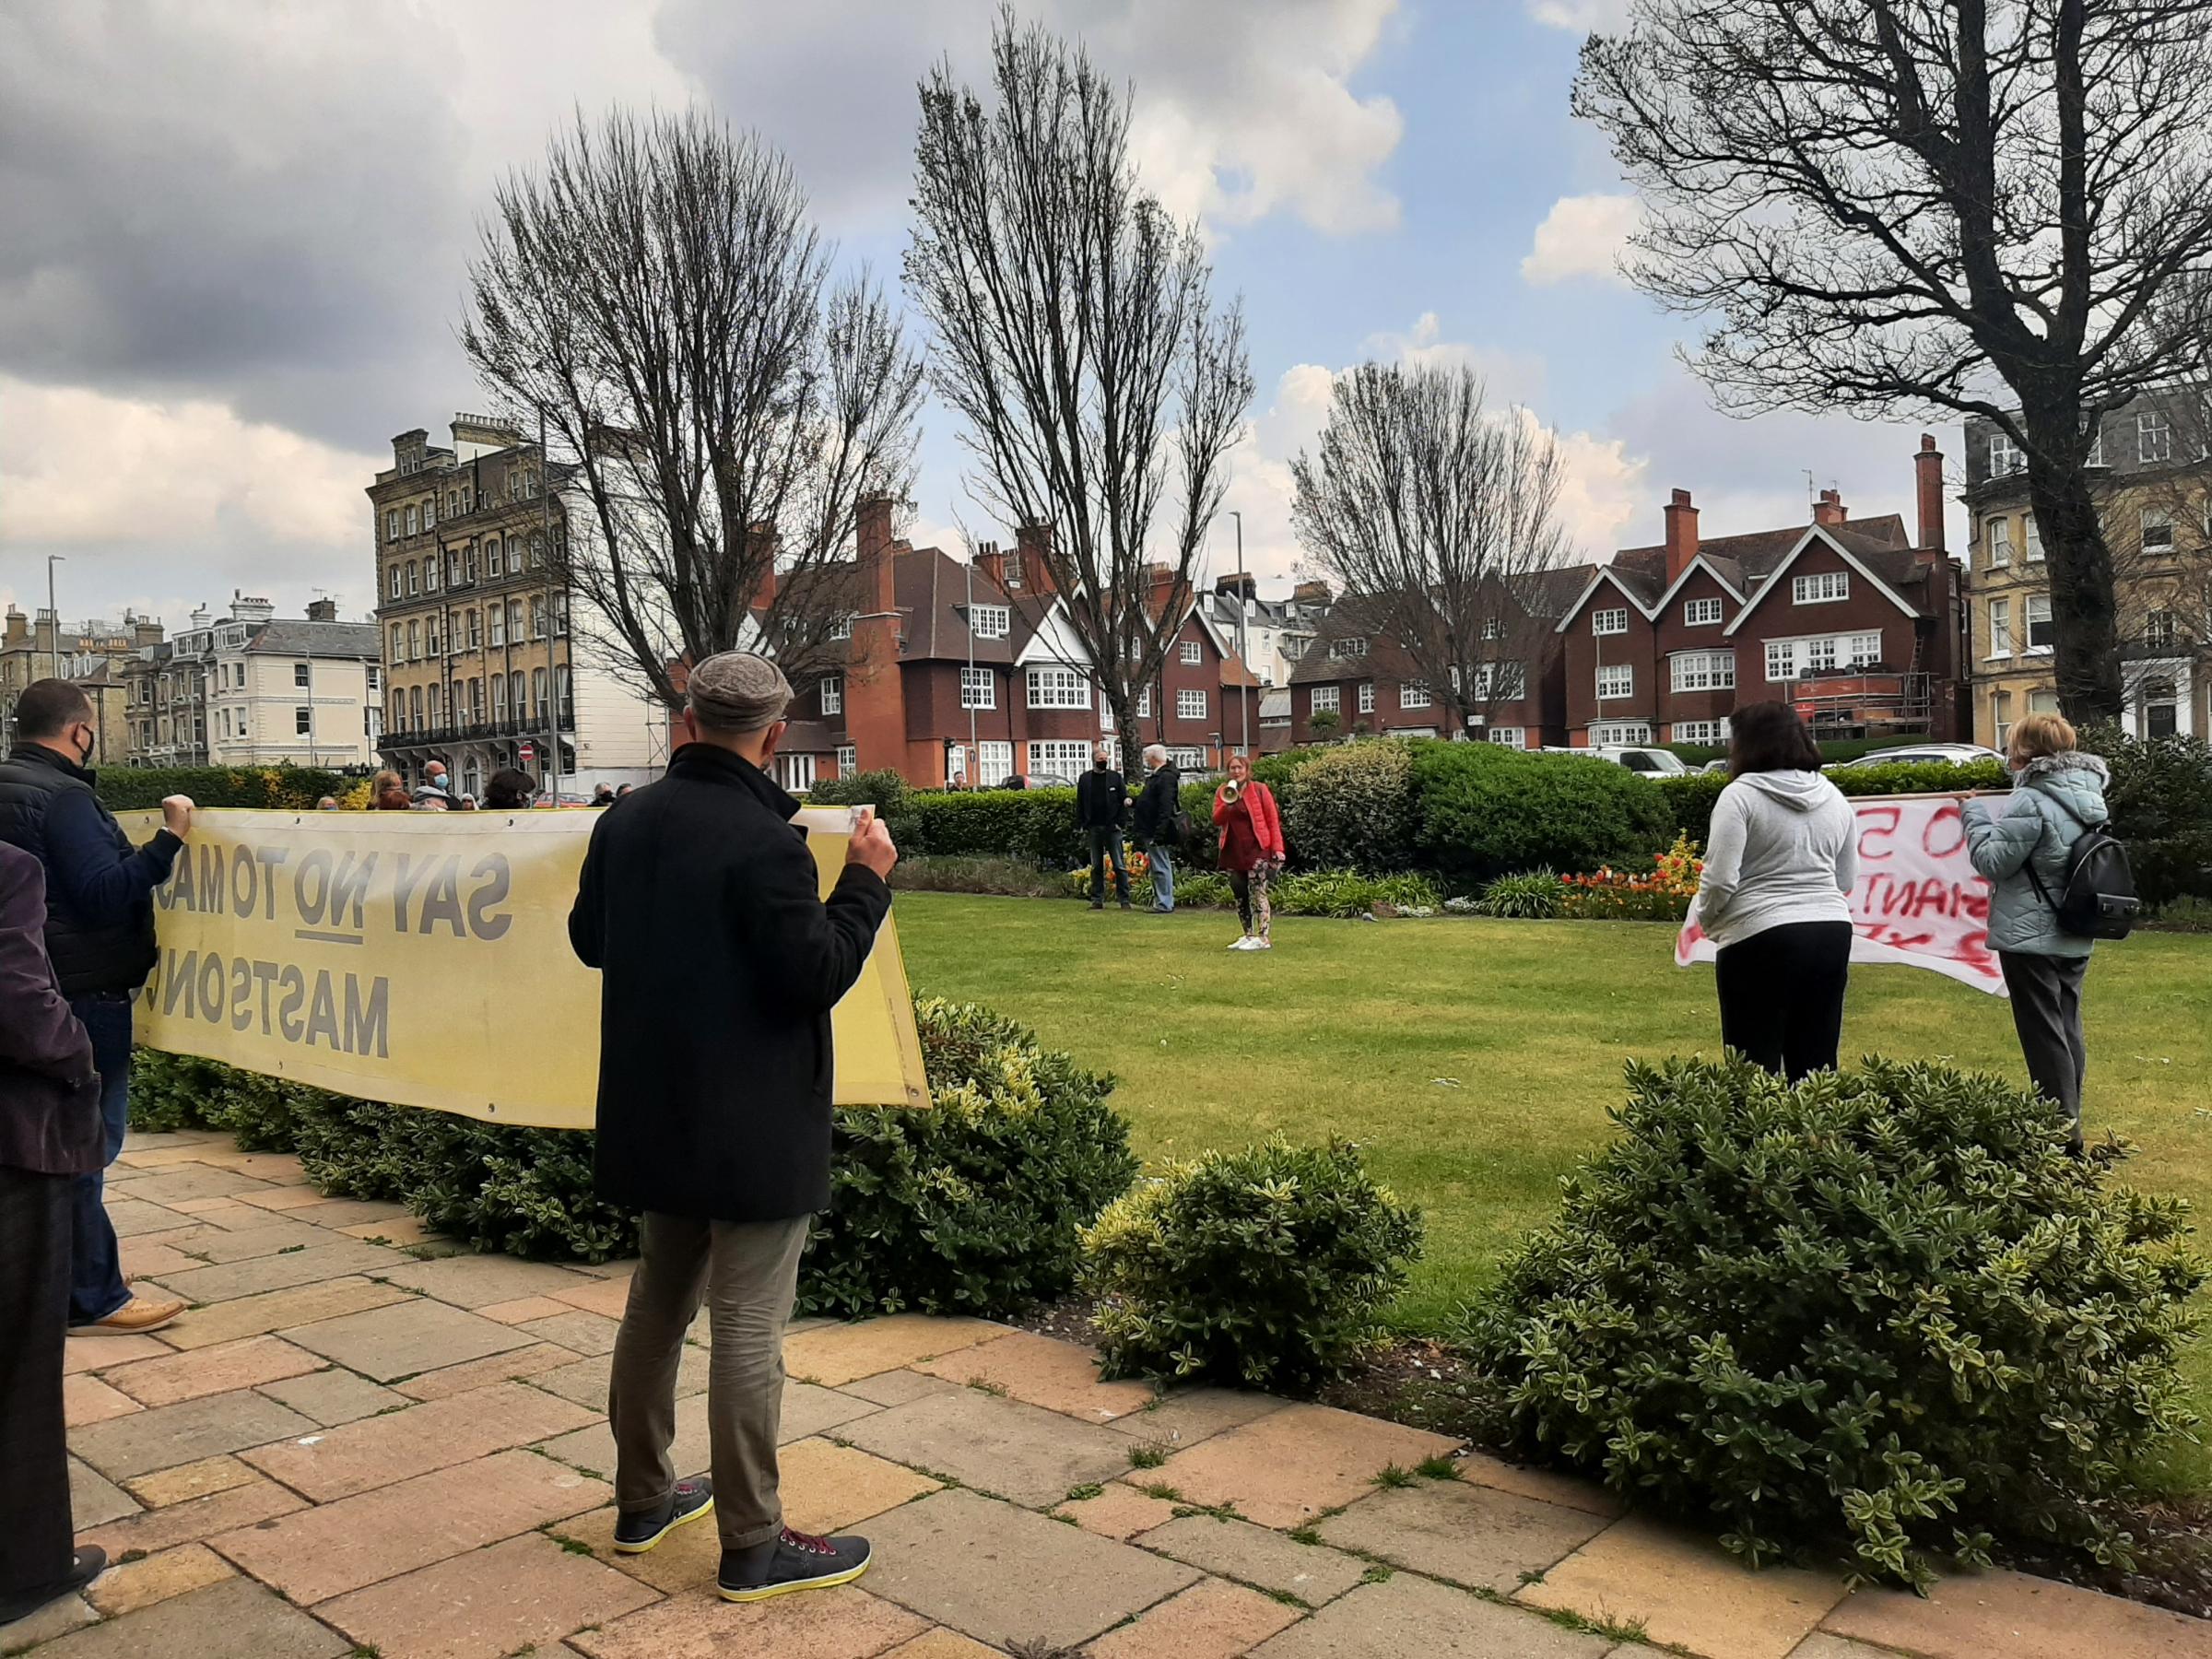 Serena Mitchell addressed the residents. Protesters are angry about plans for six 5G mobile phone masts to be installed on top of the Coombe Lea block of flats in Grand Avenue, Hove